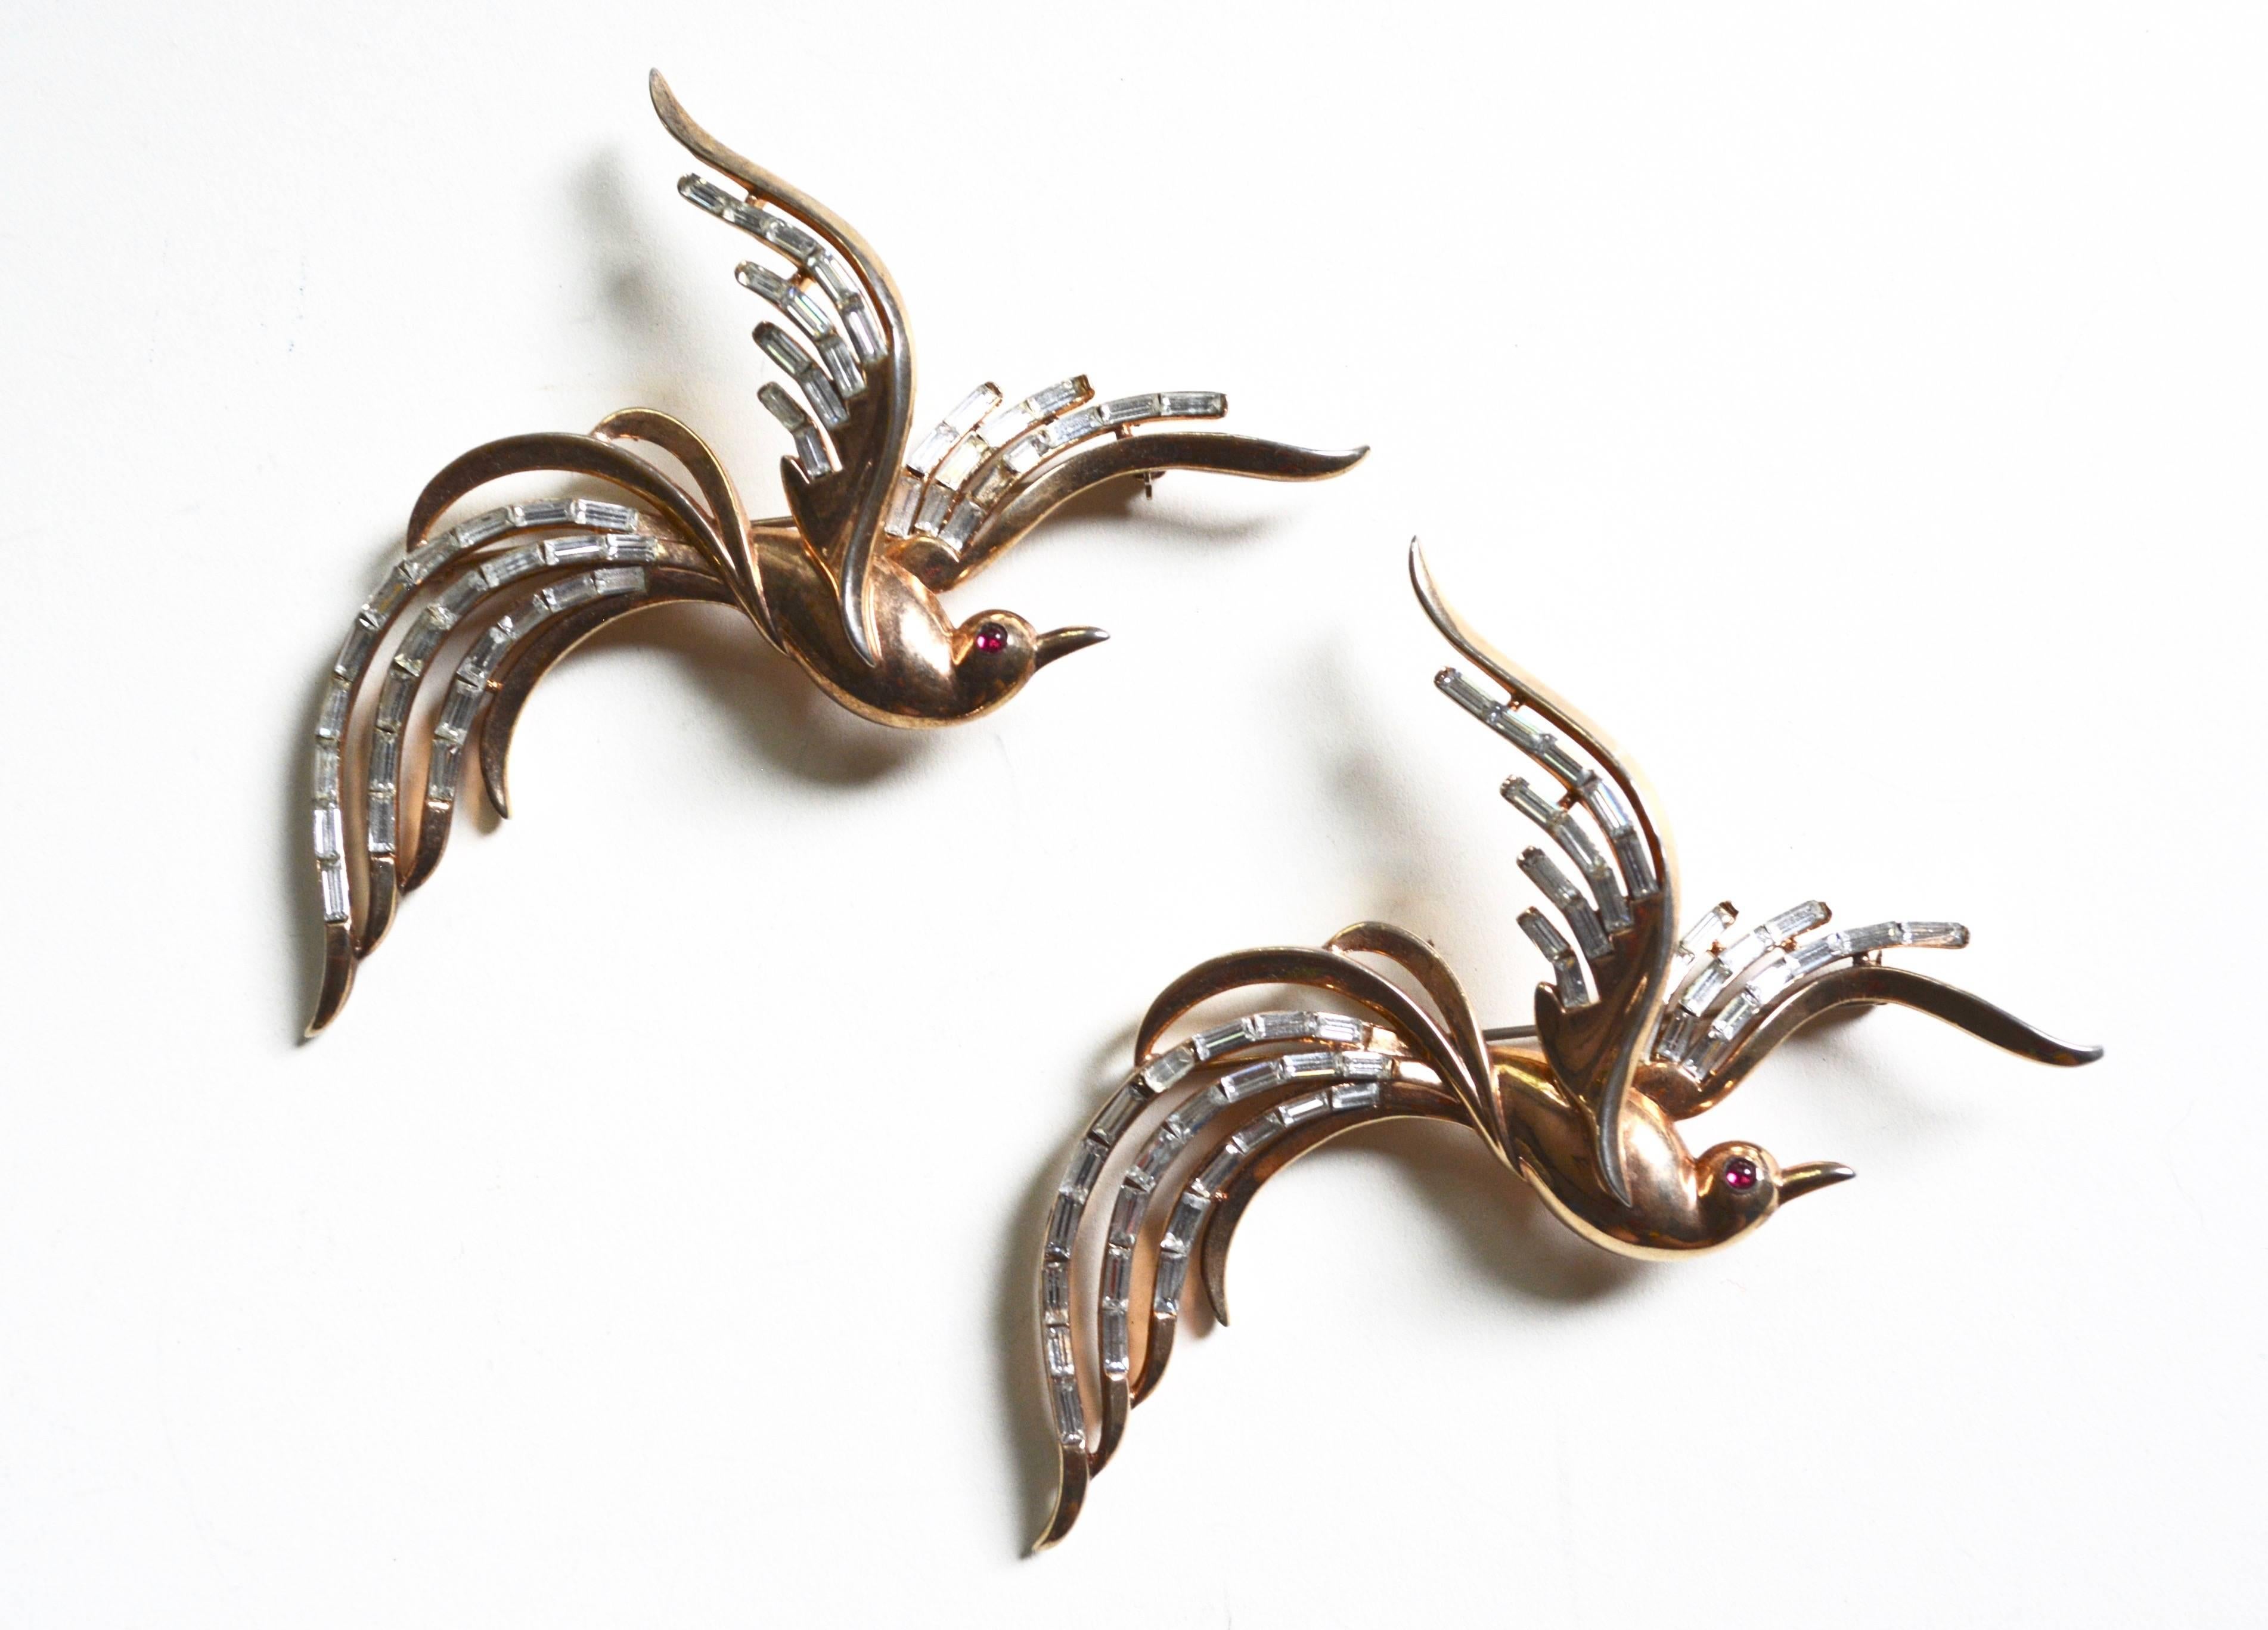 Large sterling marked Trifari Alfred Phillippe Bird of Paradise brooches. Patent granted in 1950. Wonderful movement and rarer set. Condition is very good, minimal overall wear. Each one measures 4"l x 2.5".